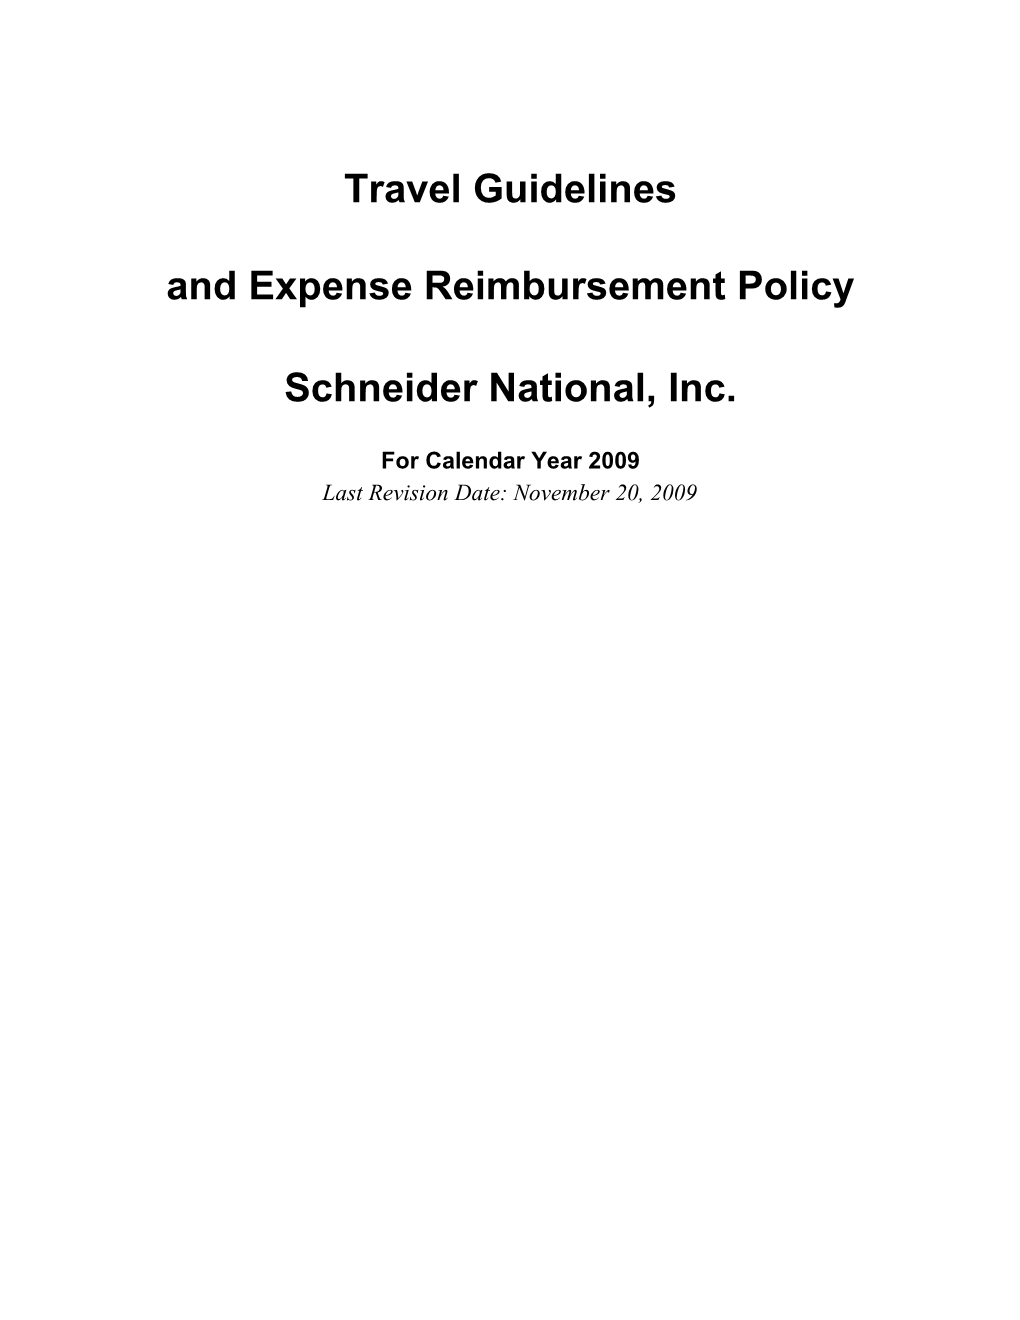 Travel and Entertainment Policy